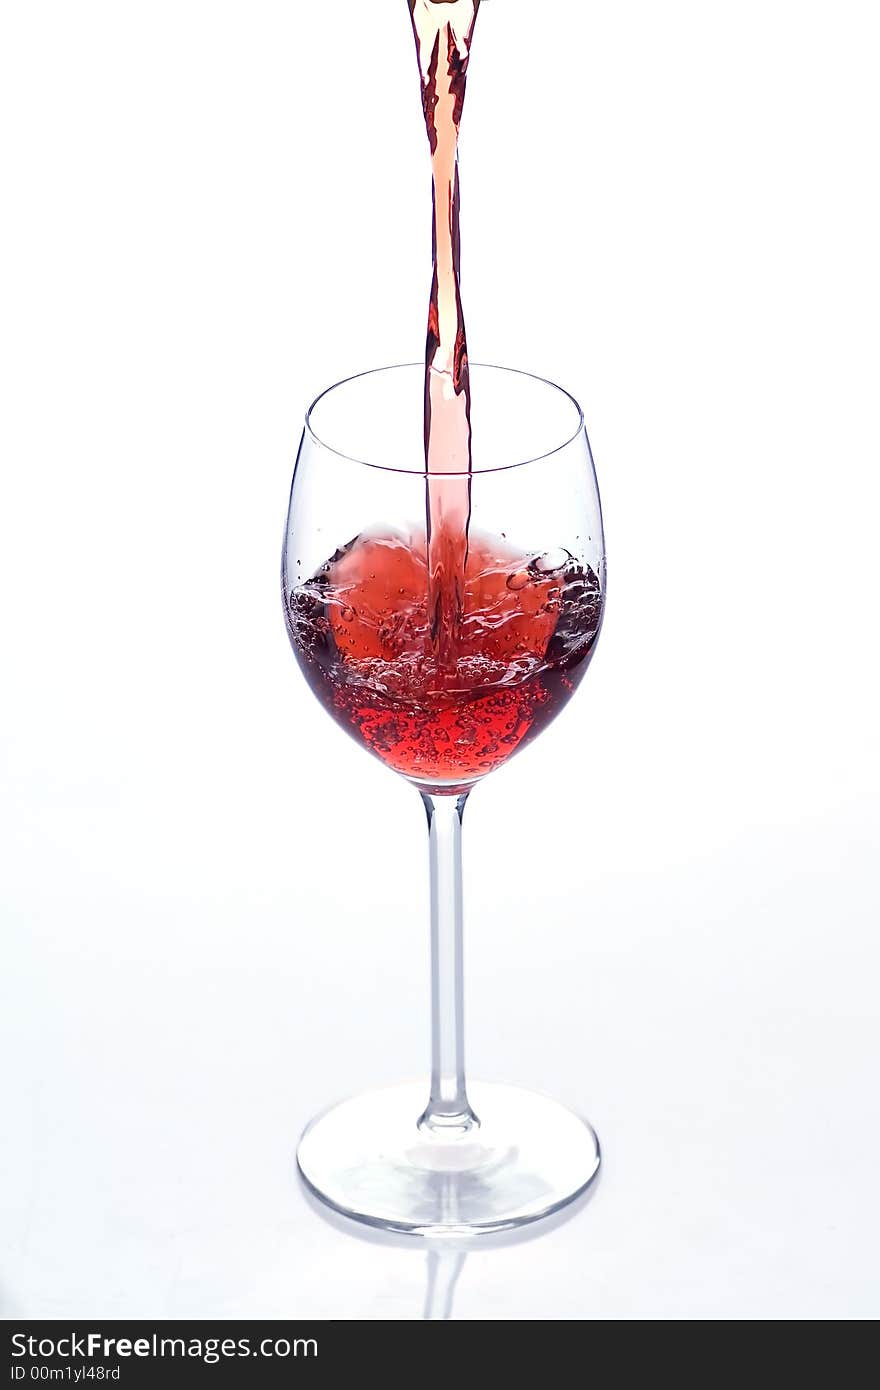 Pouring red wine into the glass - first from series